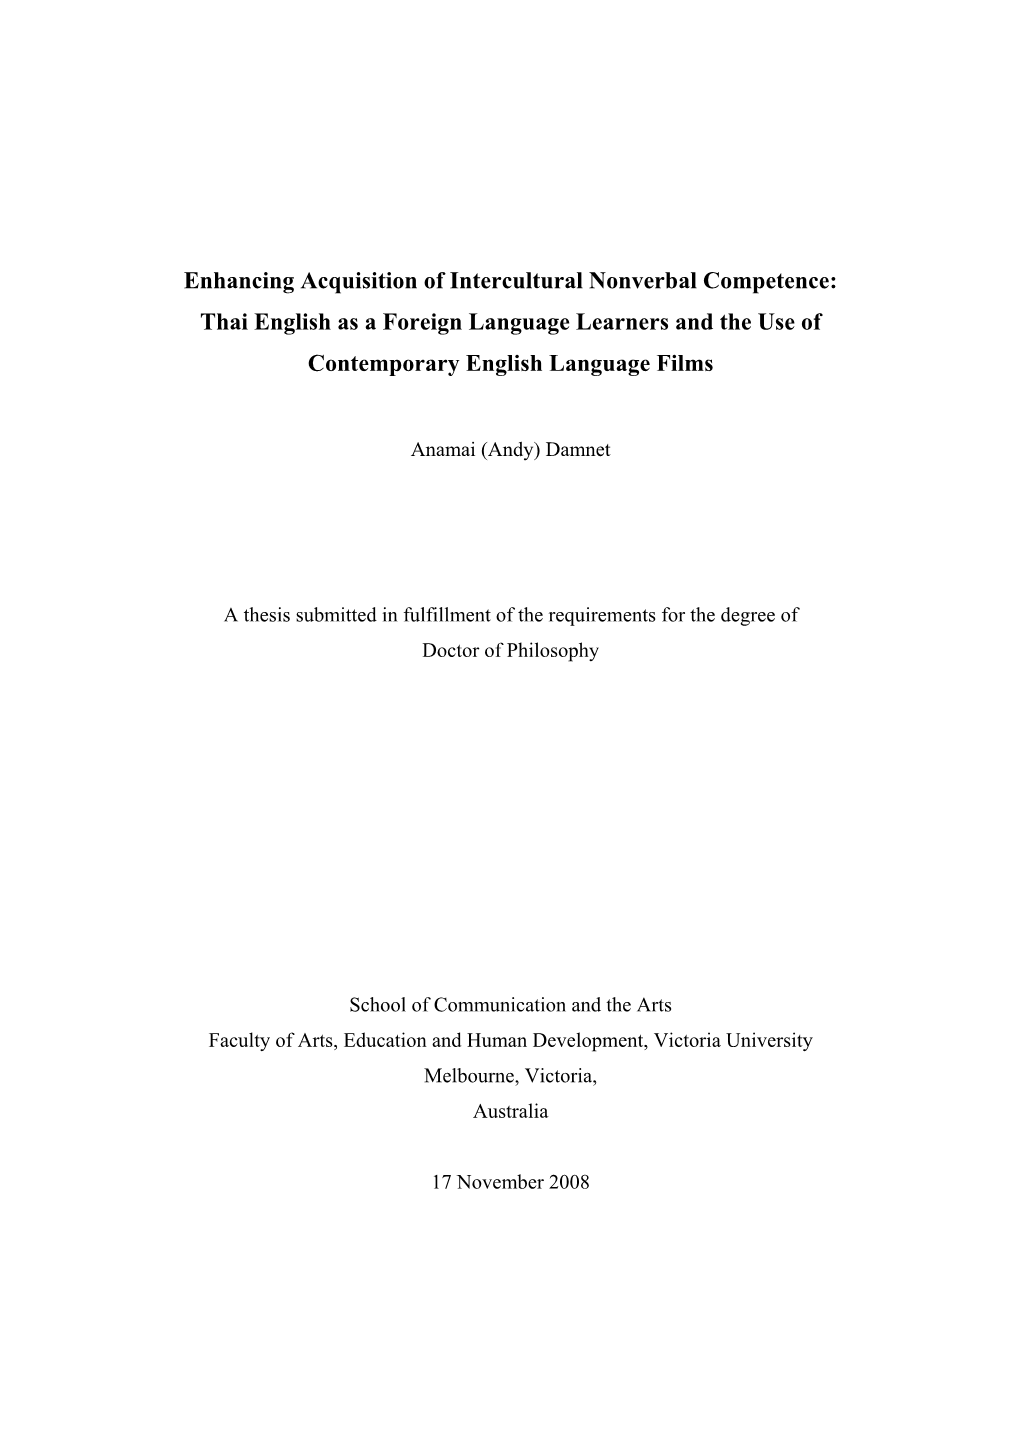 Enhancing Acquisition of Intercultural Non-Verbal Competence: Thai